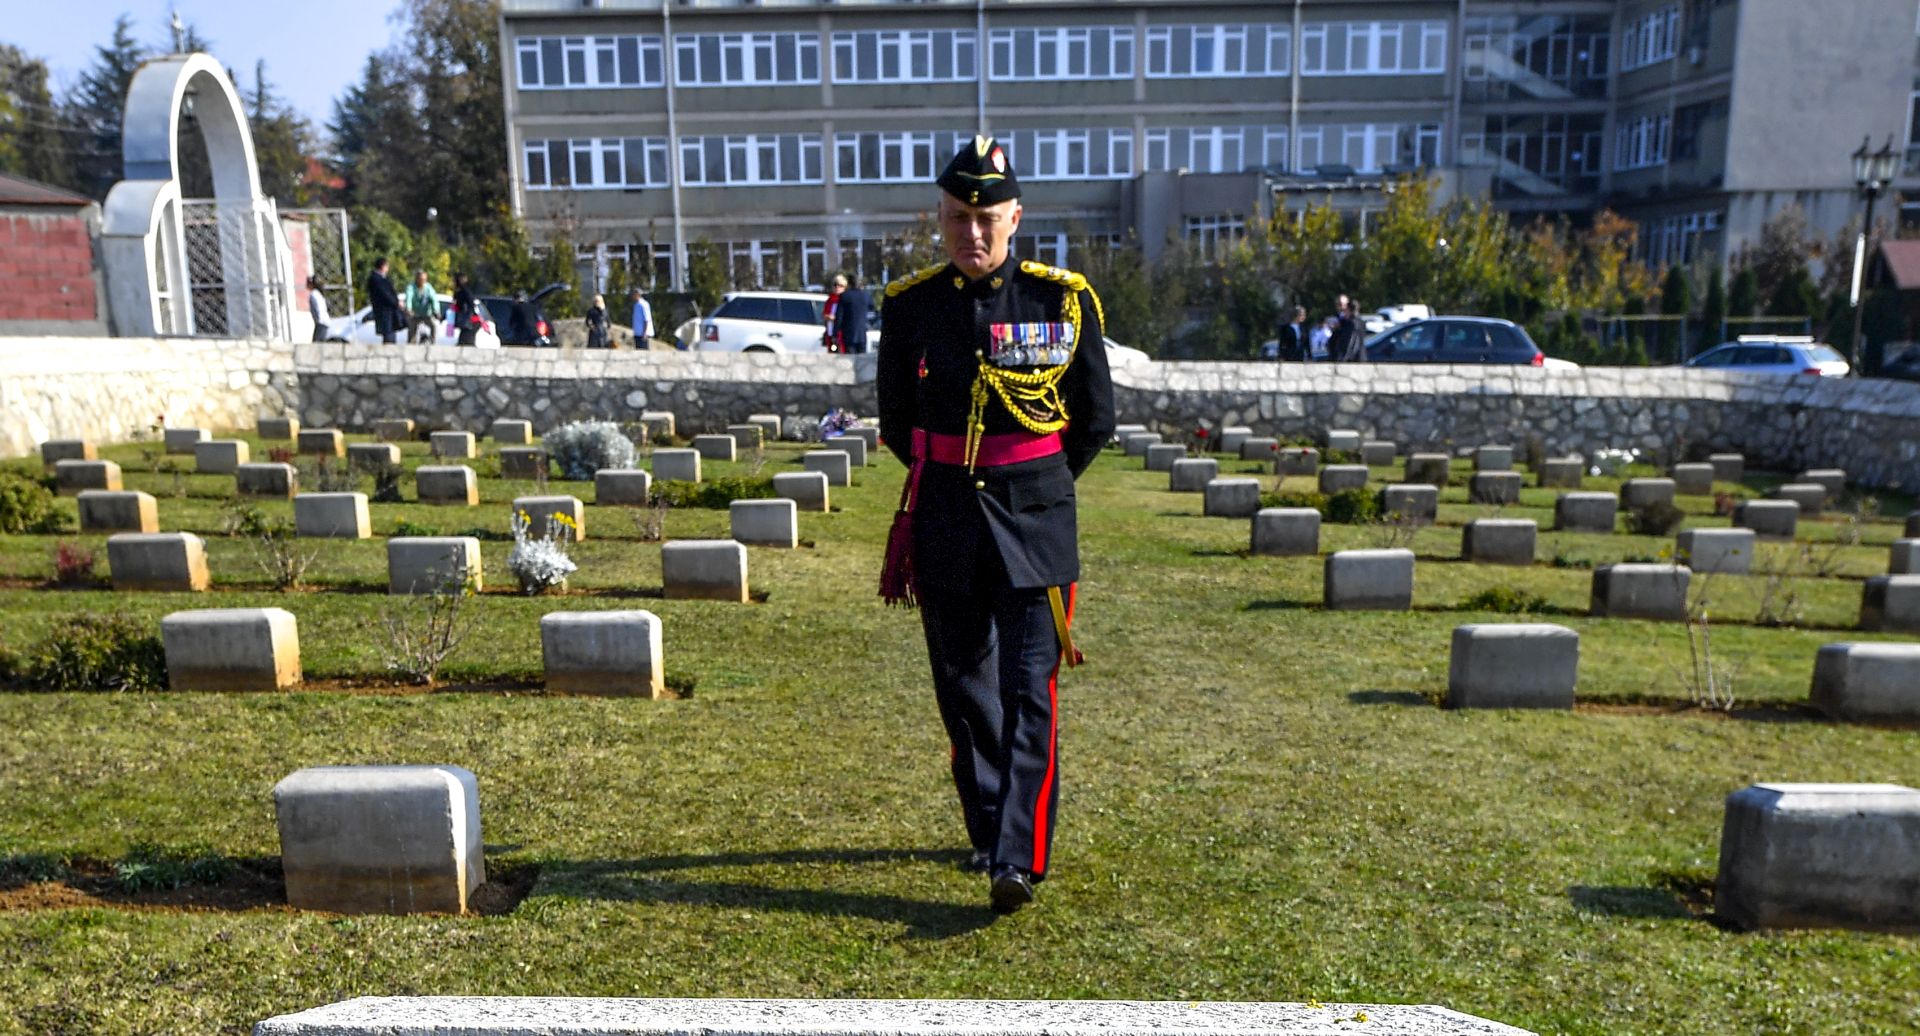 epa07157874 A British officer walks between the graves after a Service of Remembrance at the British Military Cemetery which contains the graves of British military personnel who lost their lives in the First World War in Skopje, The Former Yugoslav Republic of Macedonia on 11 November 2018. Remembrance Day is observed on 11 November to recall the official end of World War I on that date in 1918, as the major hostilities of World War I were formally ended with the German signing of the Armistice on the 11 November 1918. More than 100,000 soldiers were killed on the territory of Macedonia during World War I. World leaders have gathered in France to mark the 100th anniversary of the First World War Armistice with services taking place across the world to commemorate the occasion.  EPA/GEORGI LICOVSKI